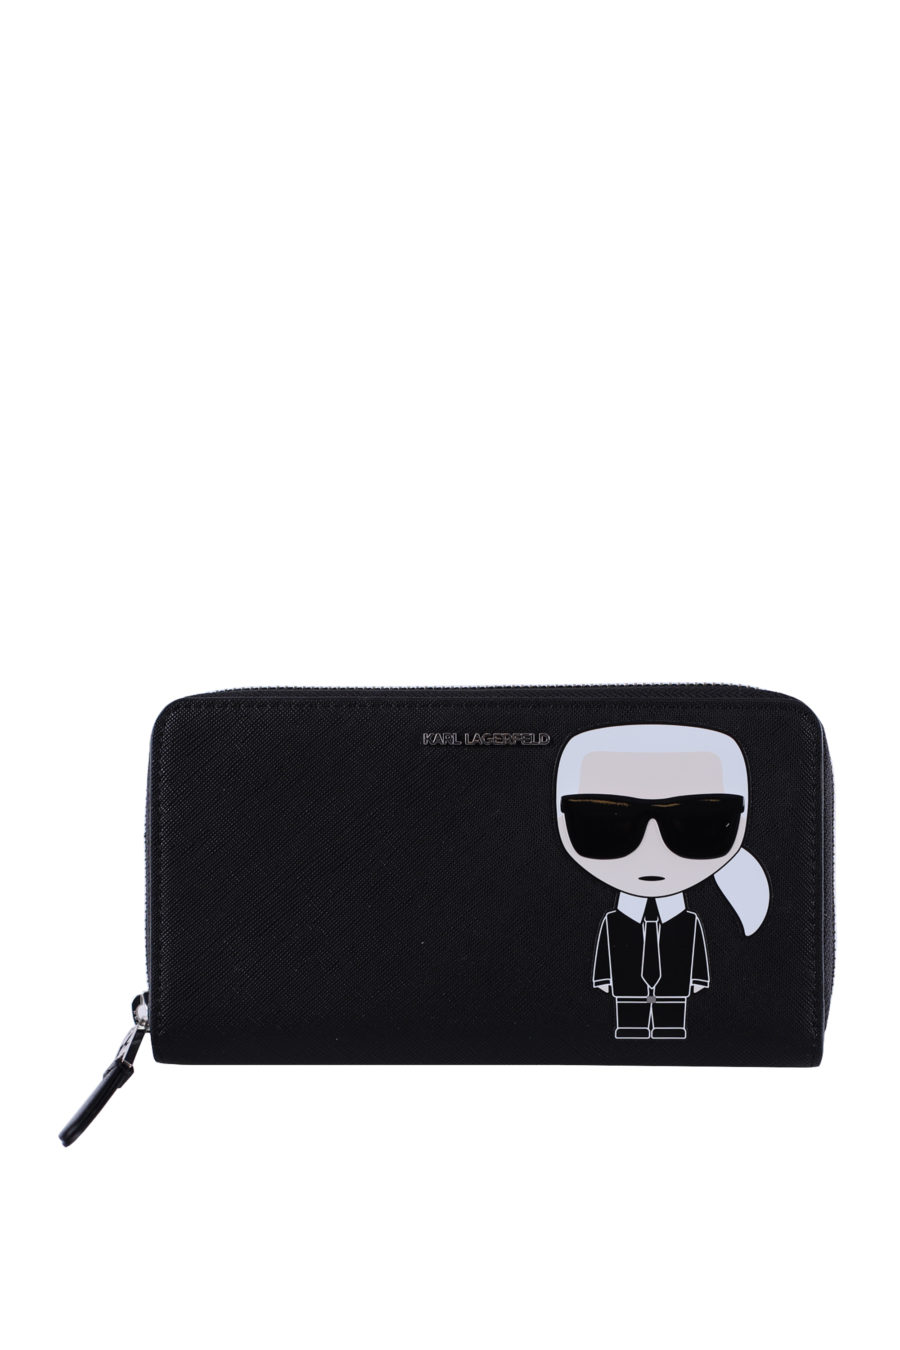 Black zipped wallet with brand logo - IMG 0030